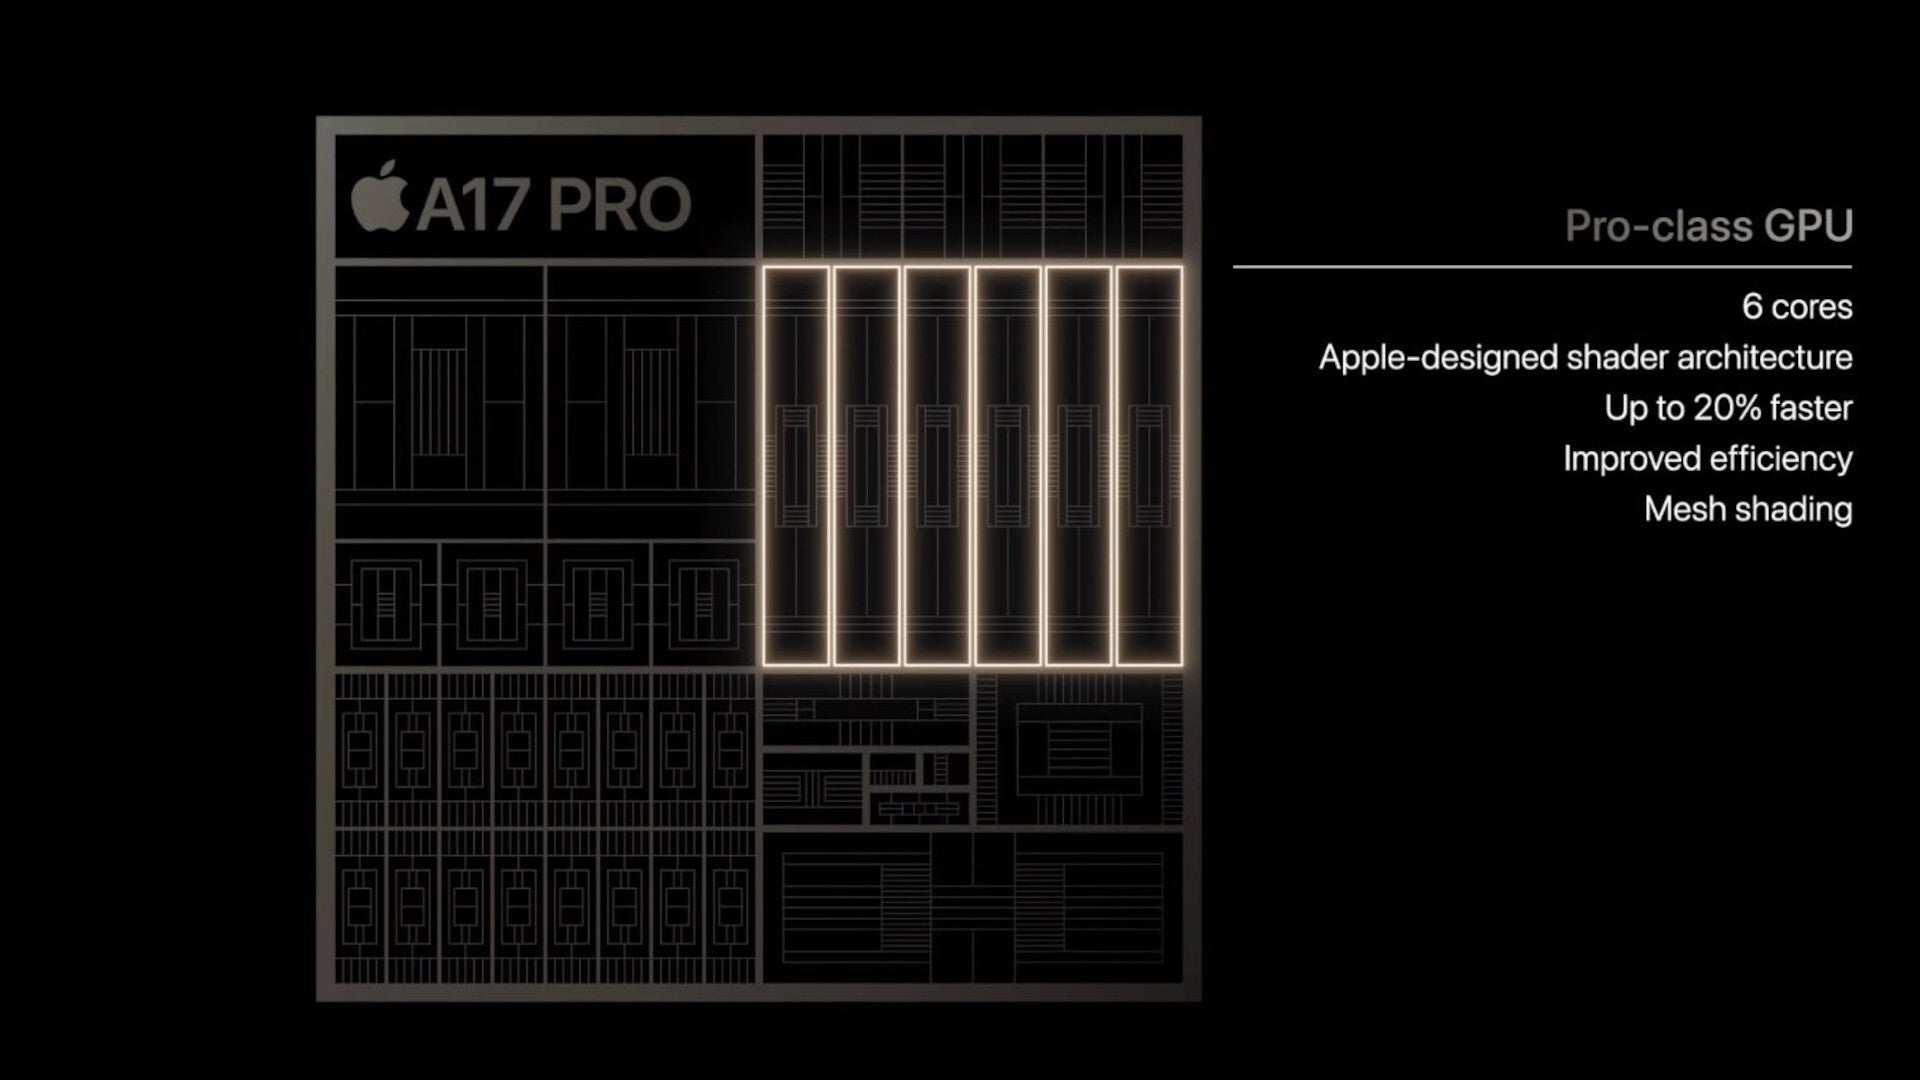 The A17 Pro GPU - "Pro-class GPU" in iPhone 15 Pro's A17 Pro chip spells trouble for PlayStation and Xbox